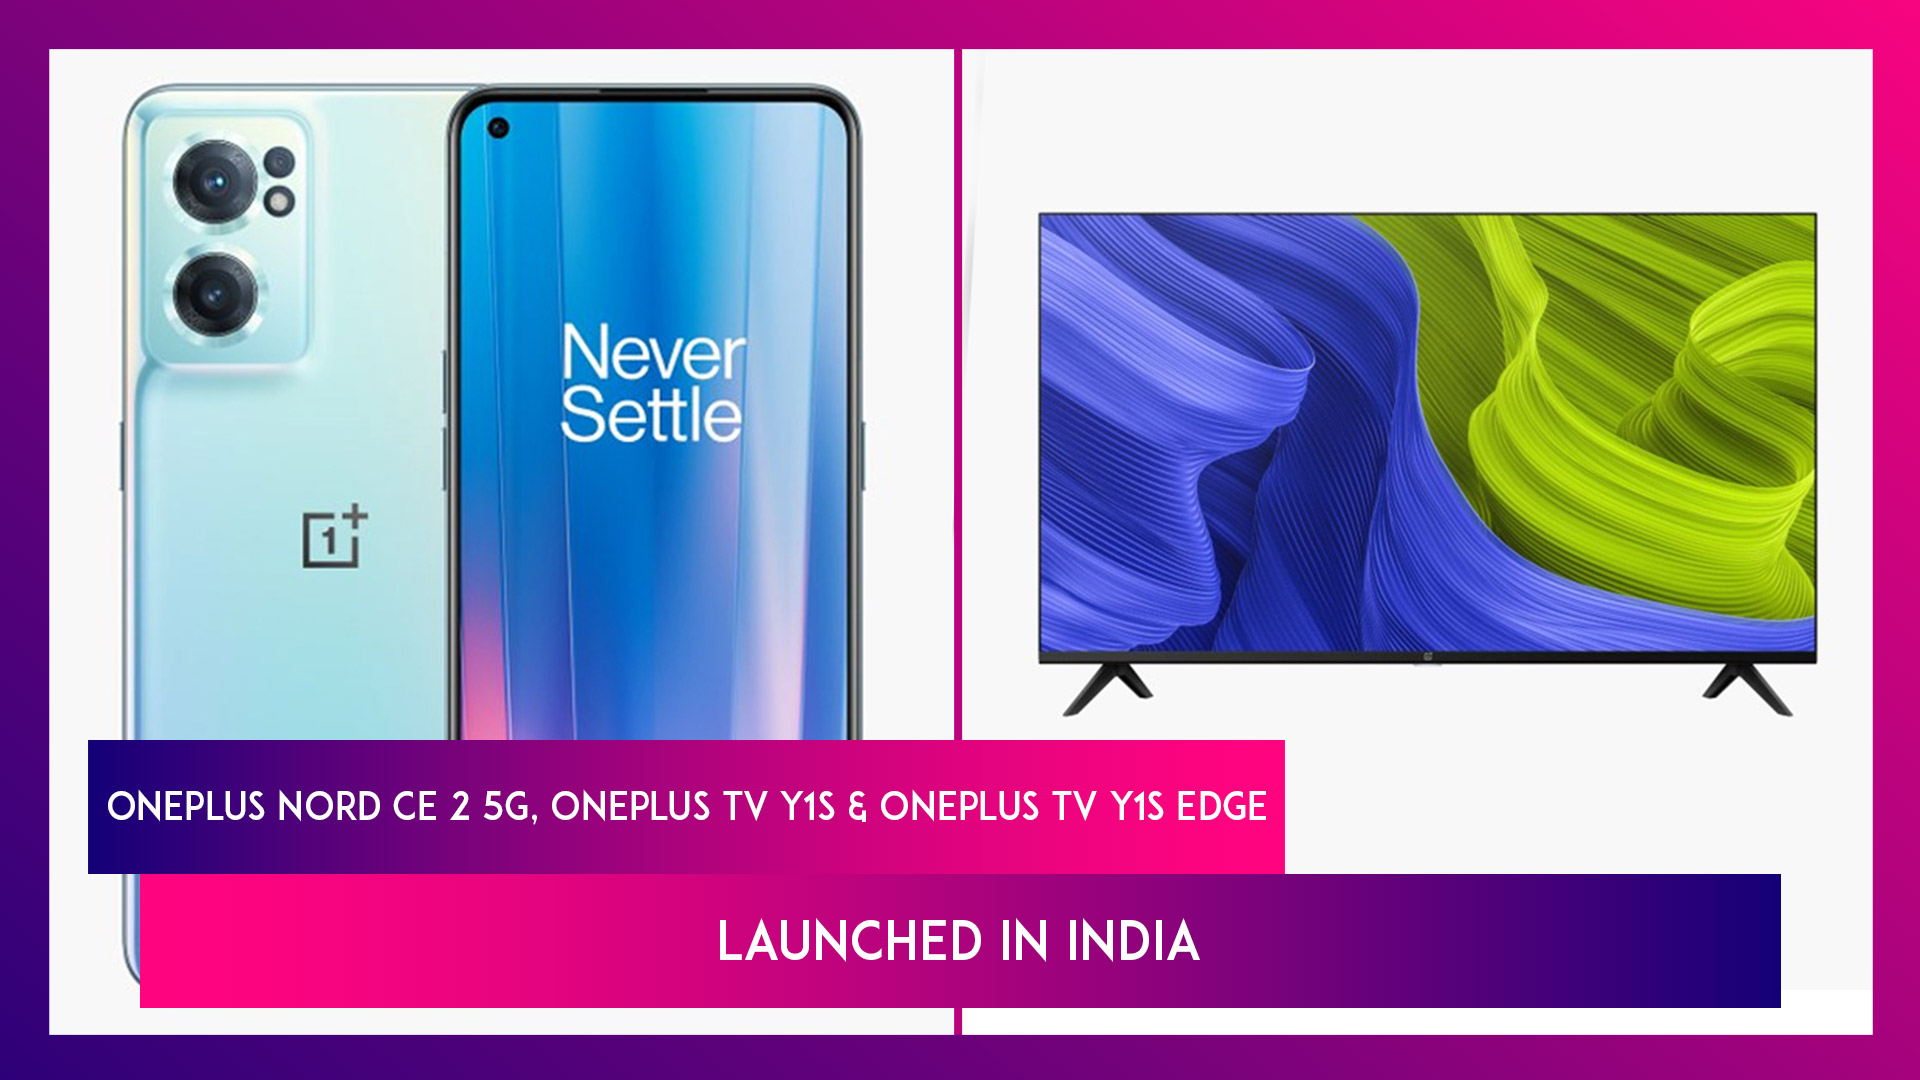 OnePlus Nord CE 2 5G, OnePlus TV Y1S & OnePlus TV Y1S Edge Launched in India